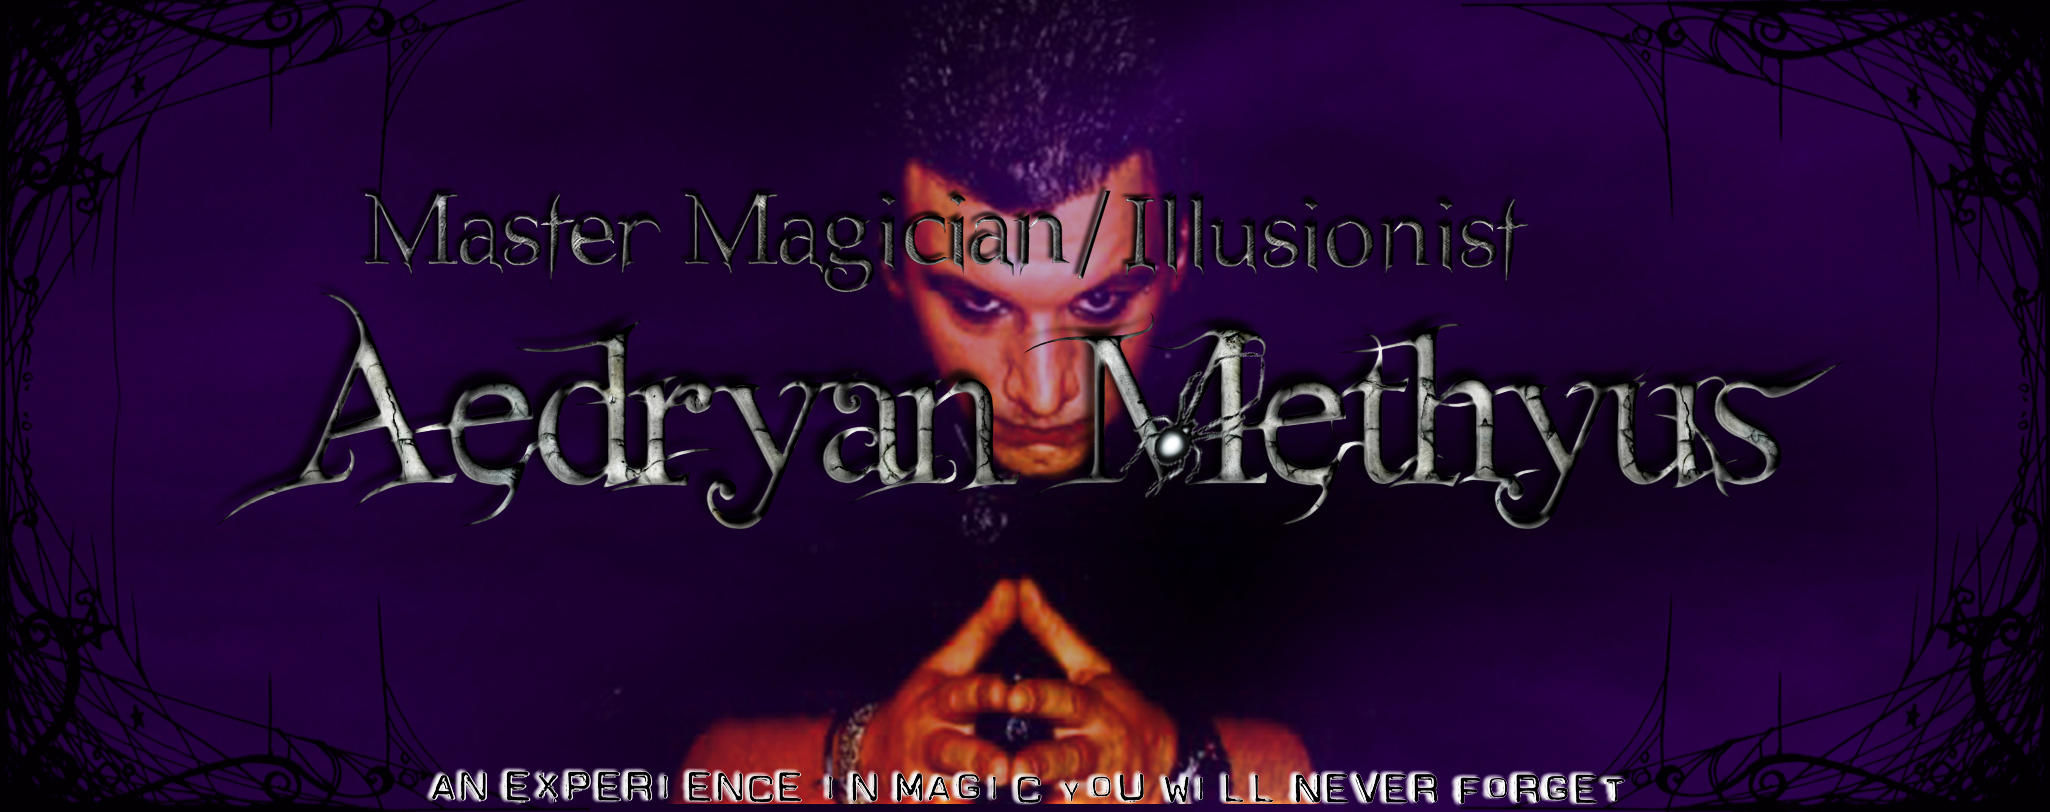 Magicians Illusionists Entertainers Promotional Material